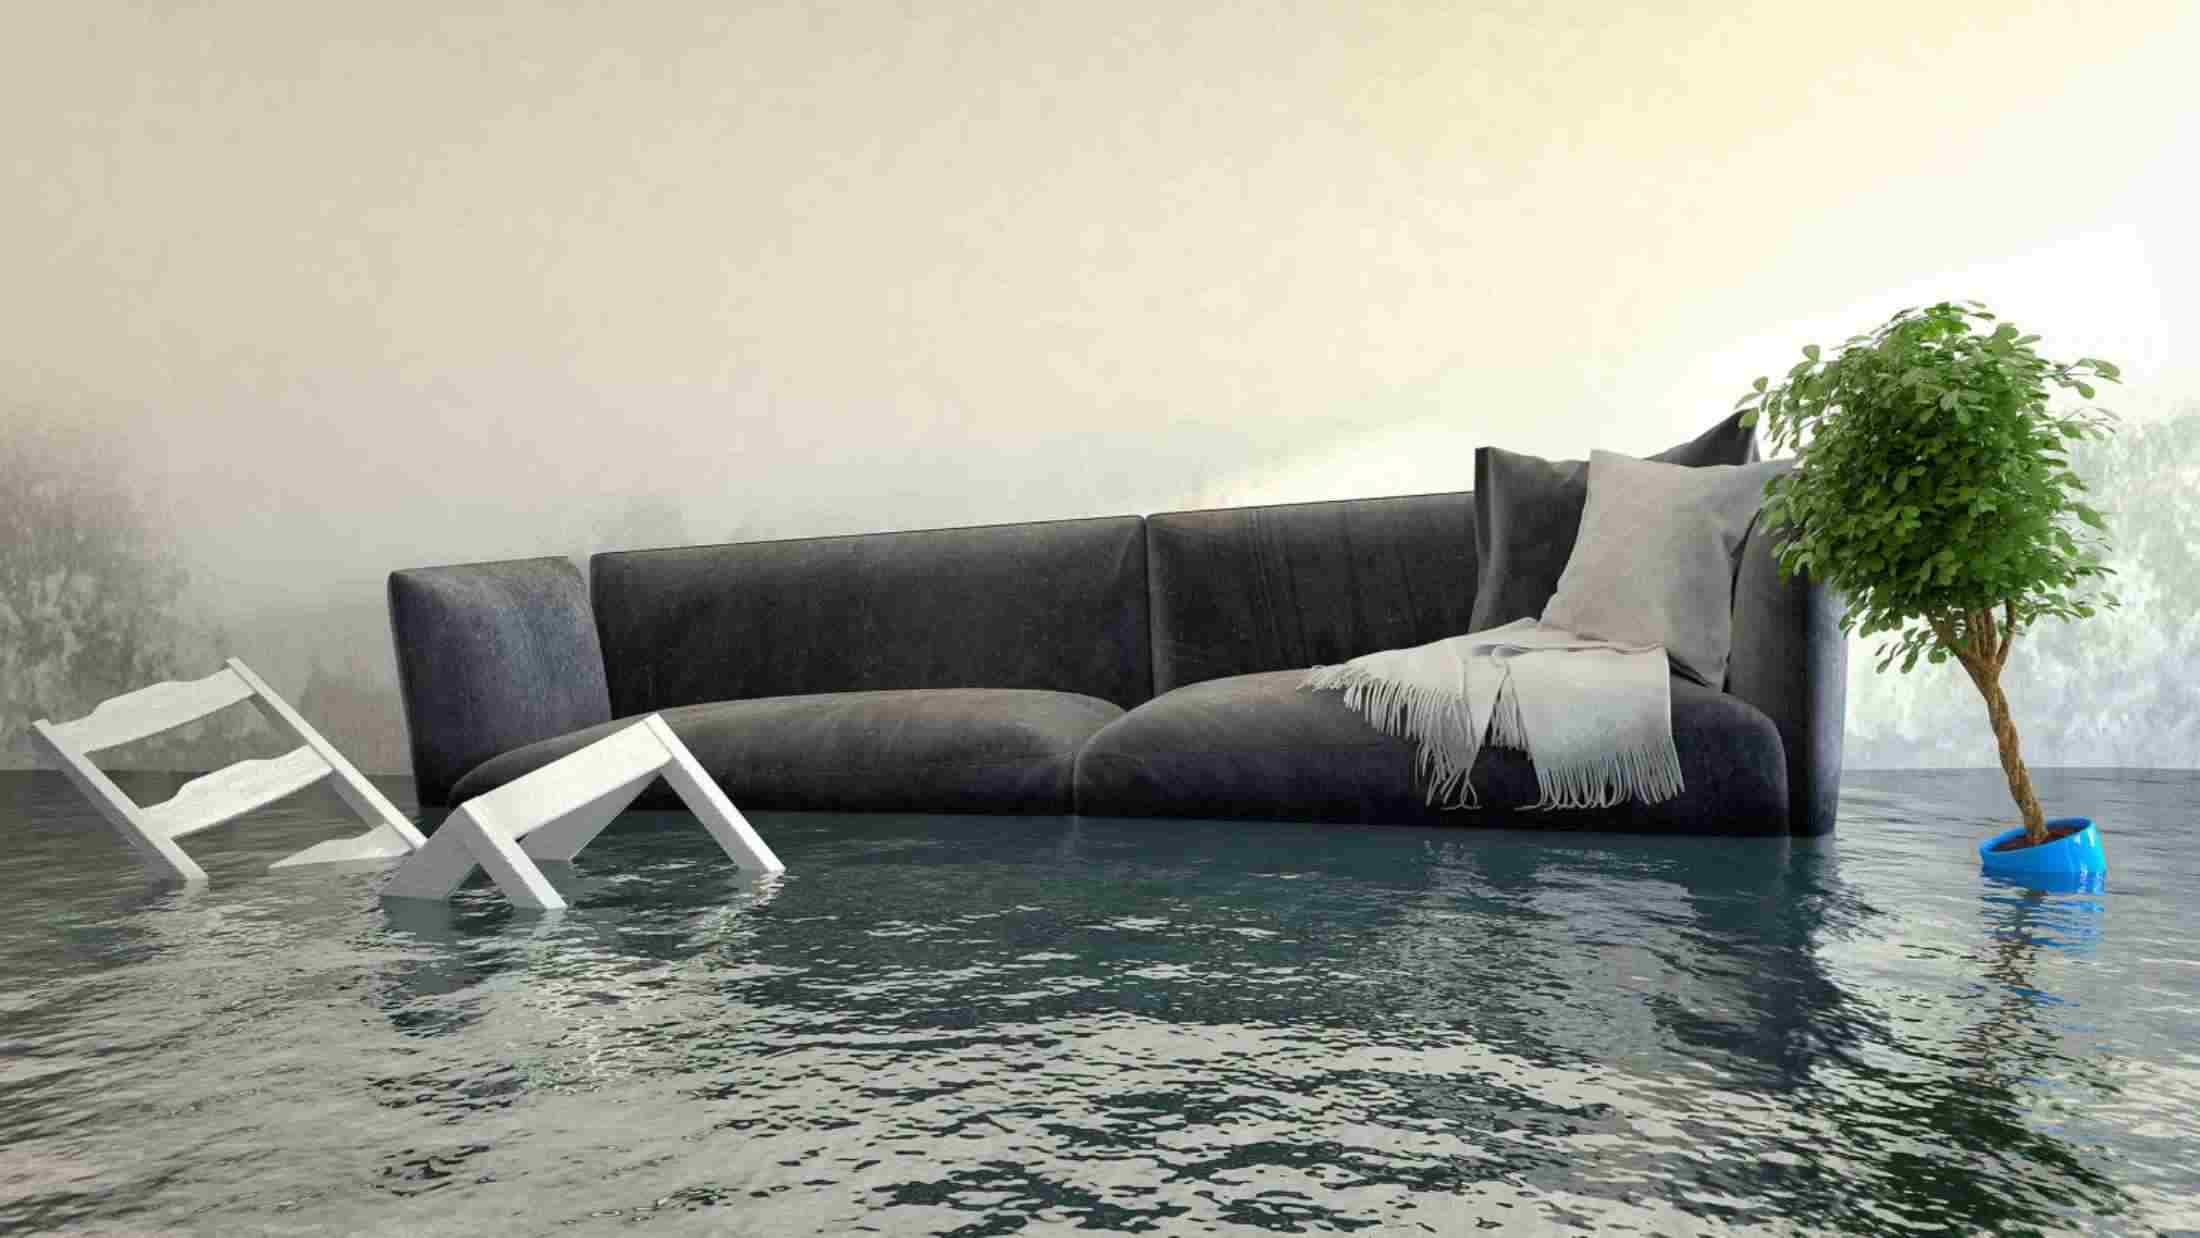 Water damage after flooding in house with furniture floating